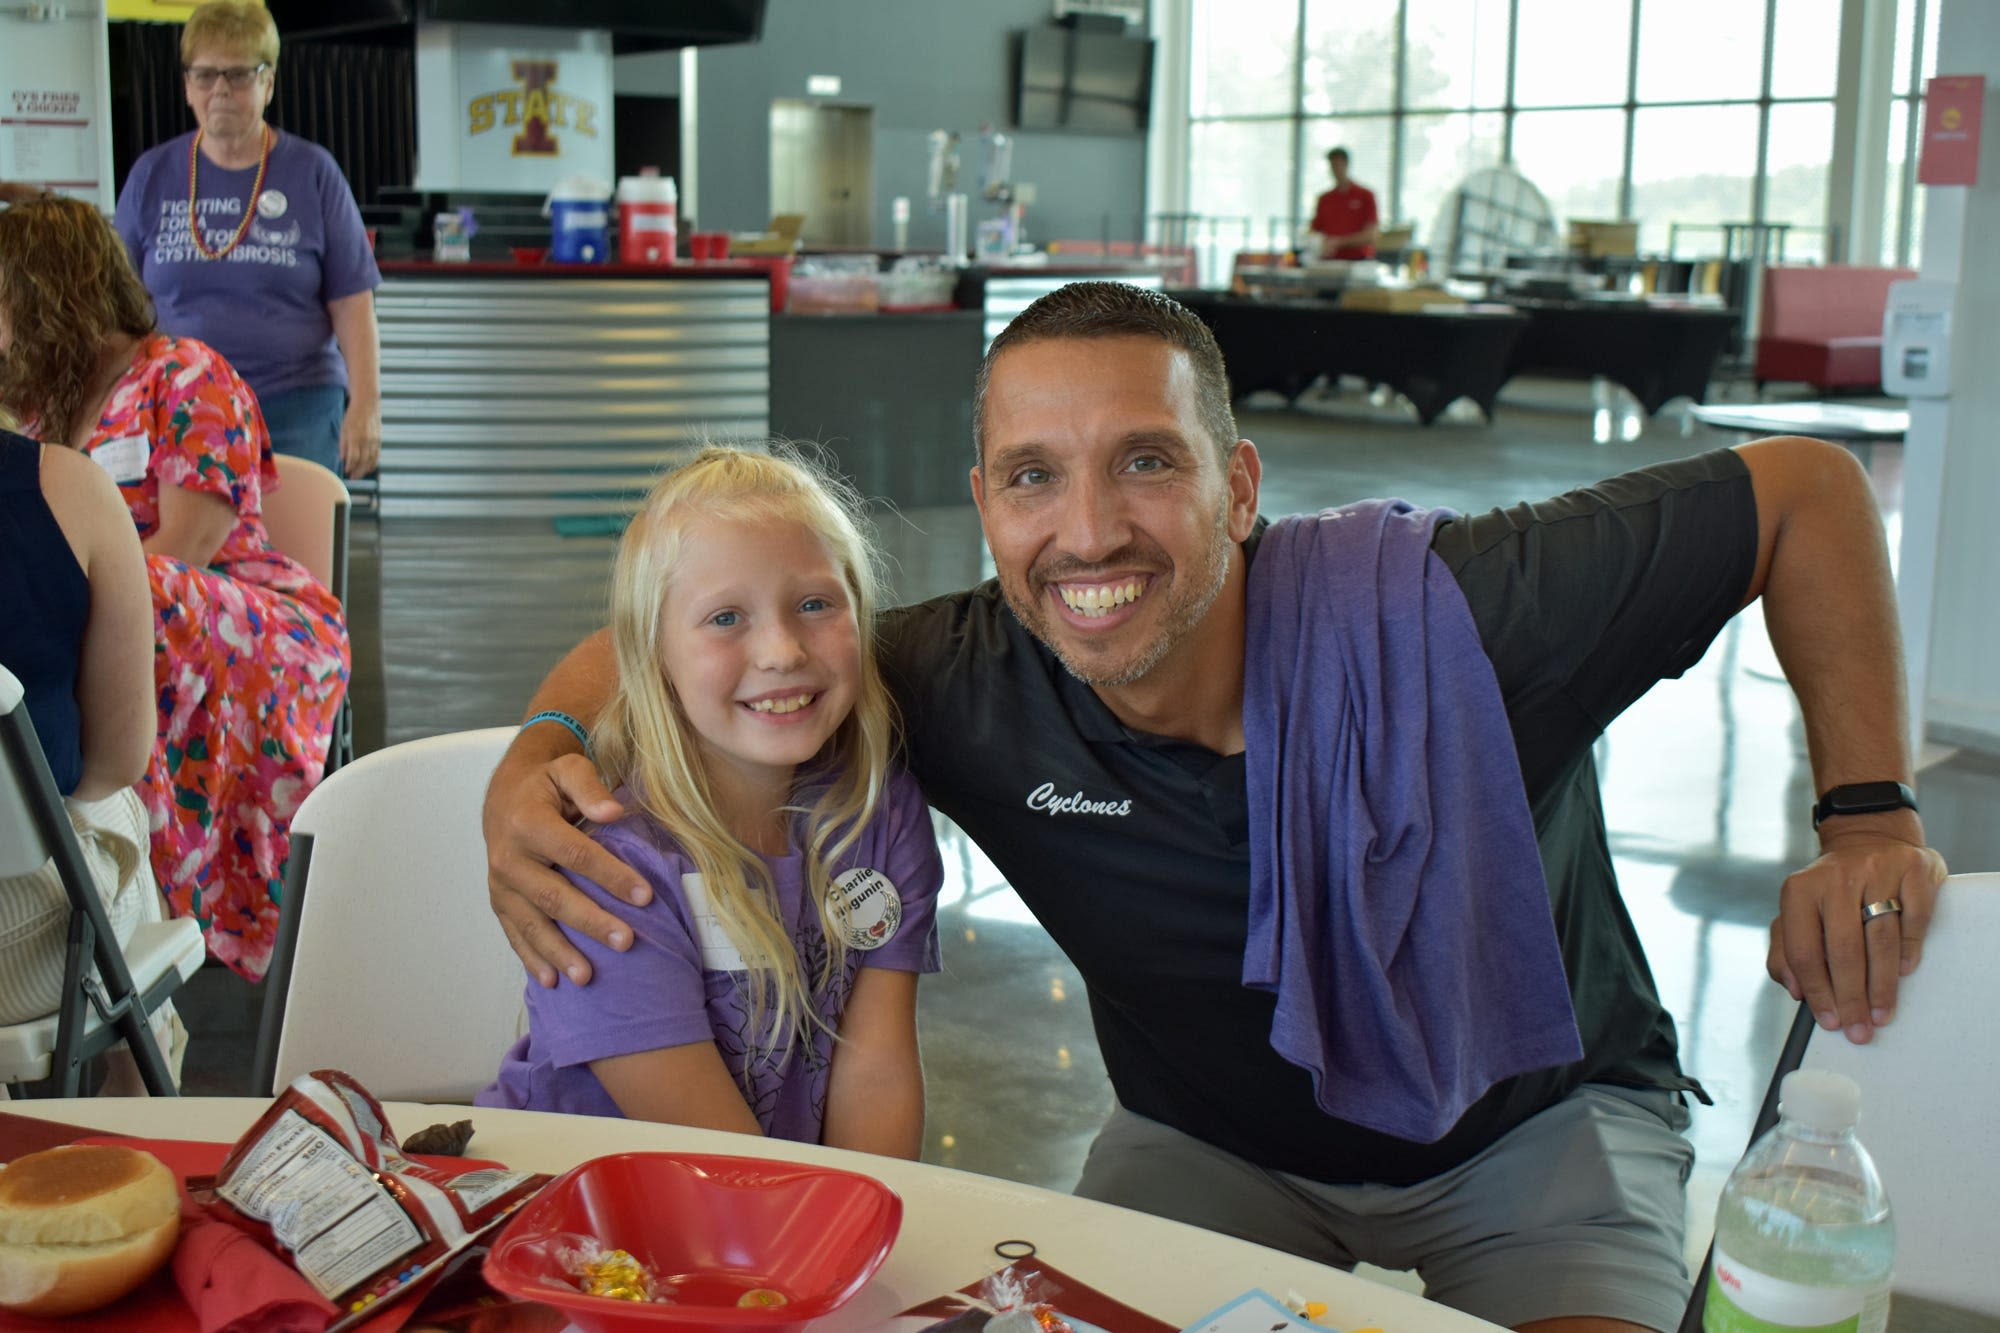 Power of purpose: 'Lunch with Coach Matt Campbell' event benefits cystic fibrosis research